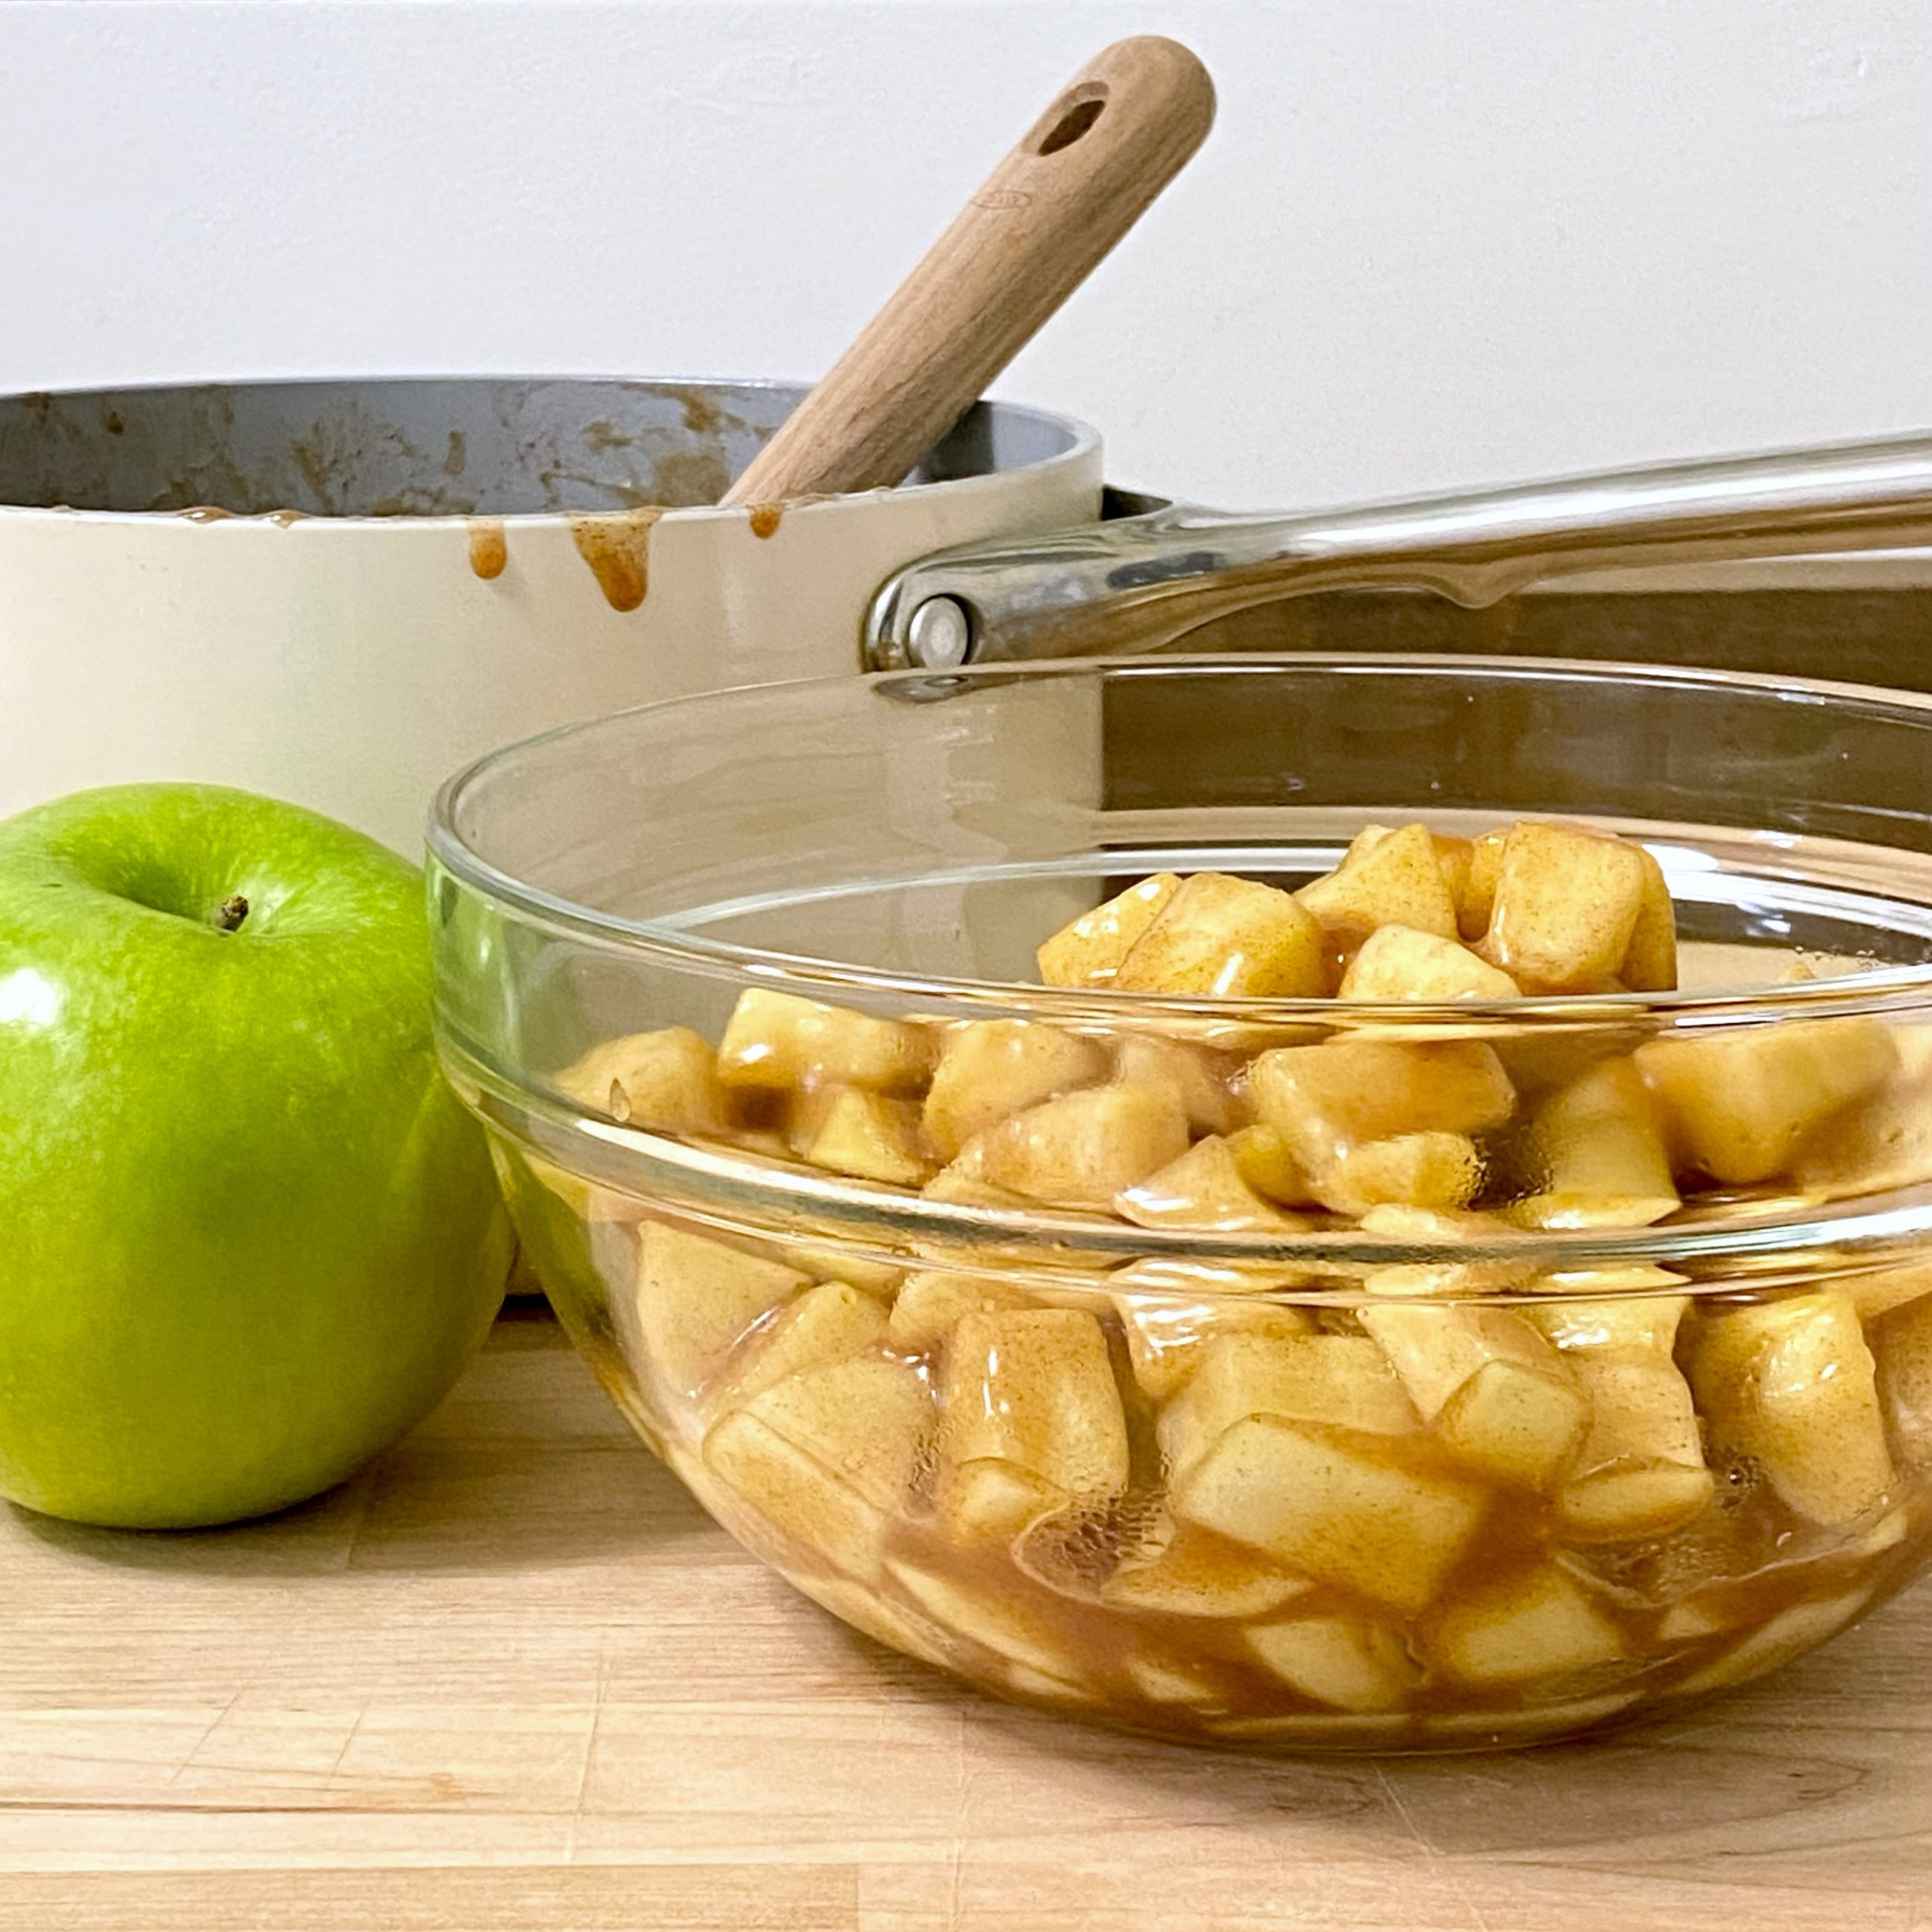 Apple pie filling in a glass bowl in from of sauce pan with a green apple next to them.